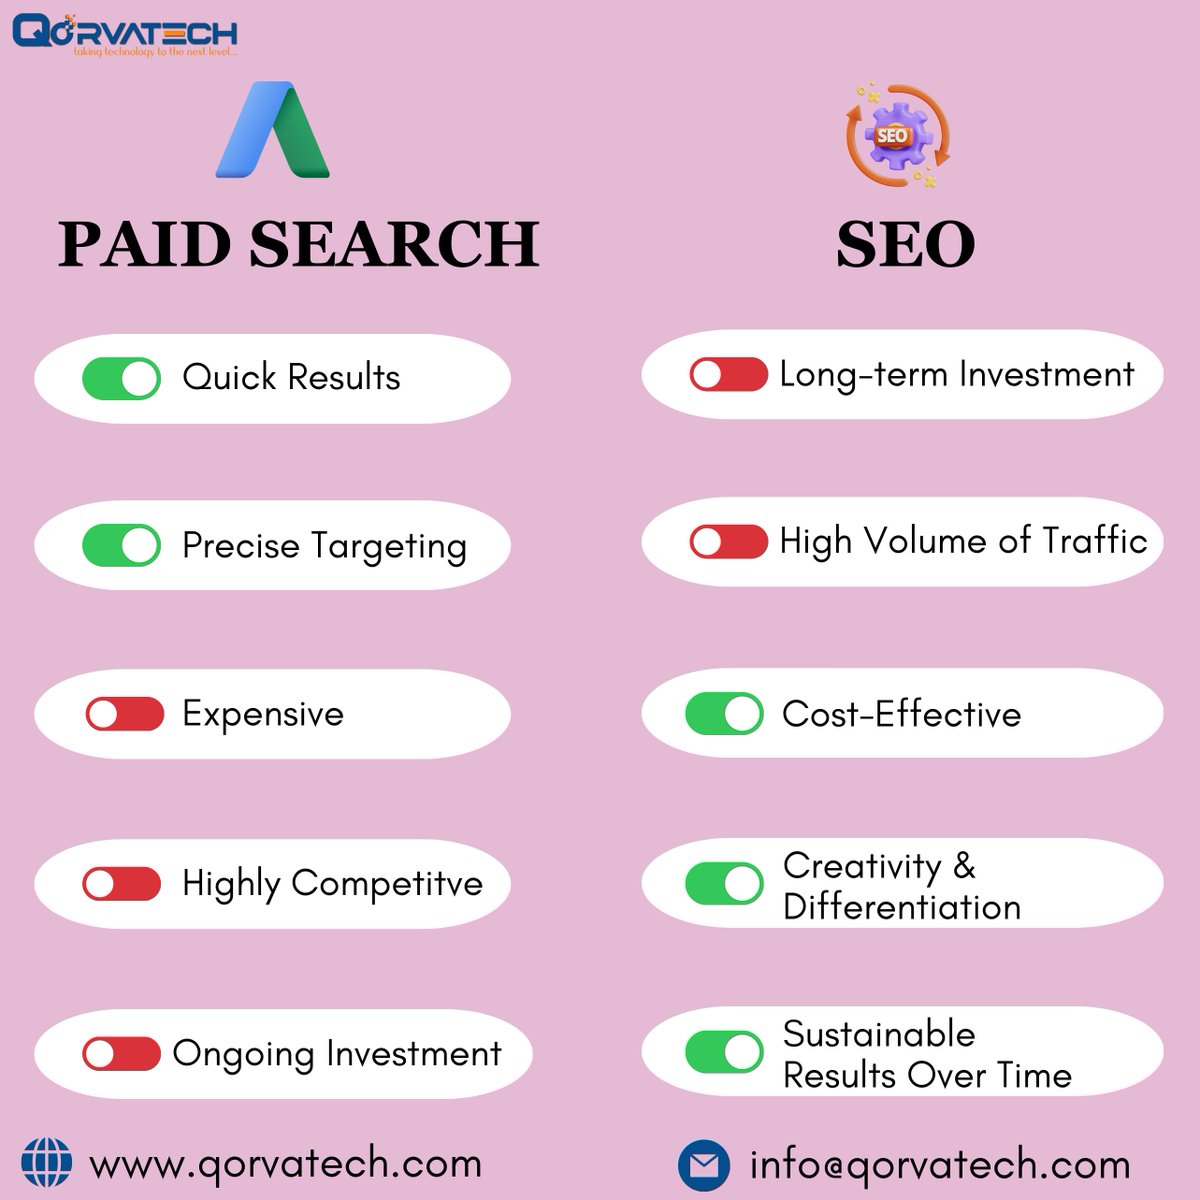 Paid Search vs SEO ? Your marketing hinges on that decision!!!
.
Contact us on :
📷 8851882460
📷 qorvatech.com
📷 info@qorvatech.com
.
#seo #seo2023 #googleadwords #googleadword2023 #paidsearch2023 #searchengineoptimization2023 #searchedvertisingexpert2023 #ppc